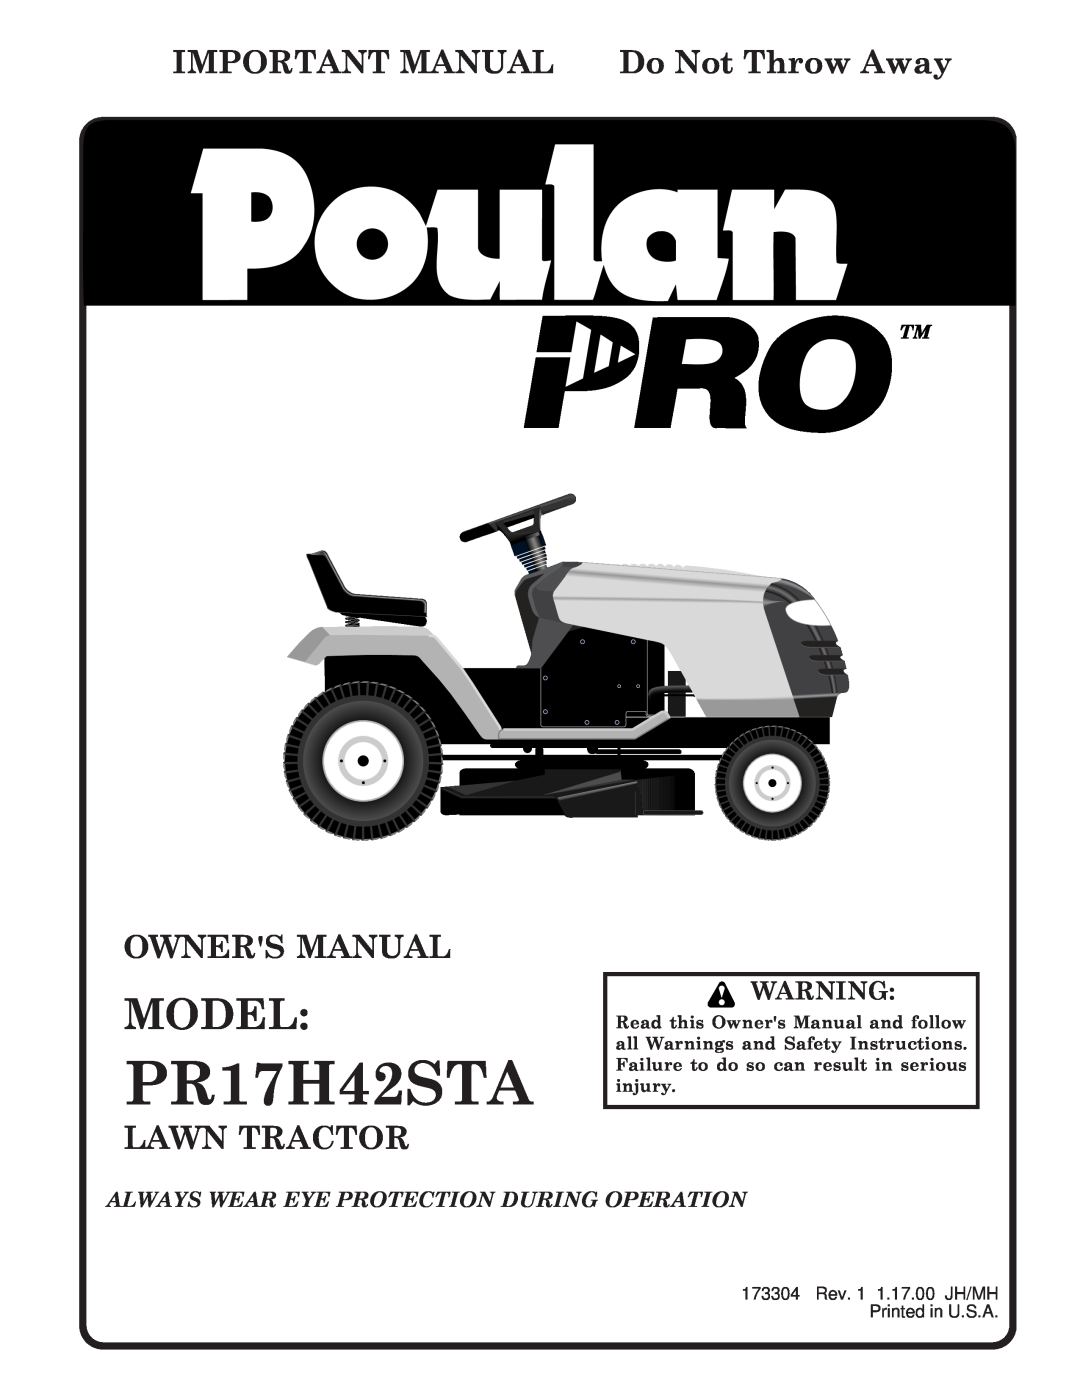 Poulan 173304 owner manual PR17H42STA, Model, IMPORTANT MANUAL Do Not Throw Away, Lawn Tractor 